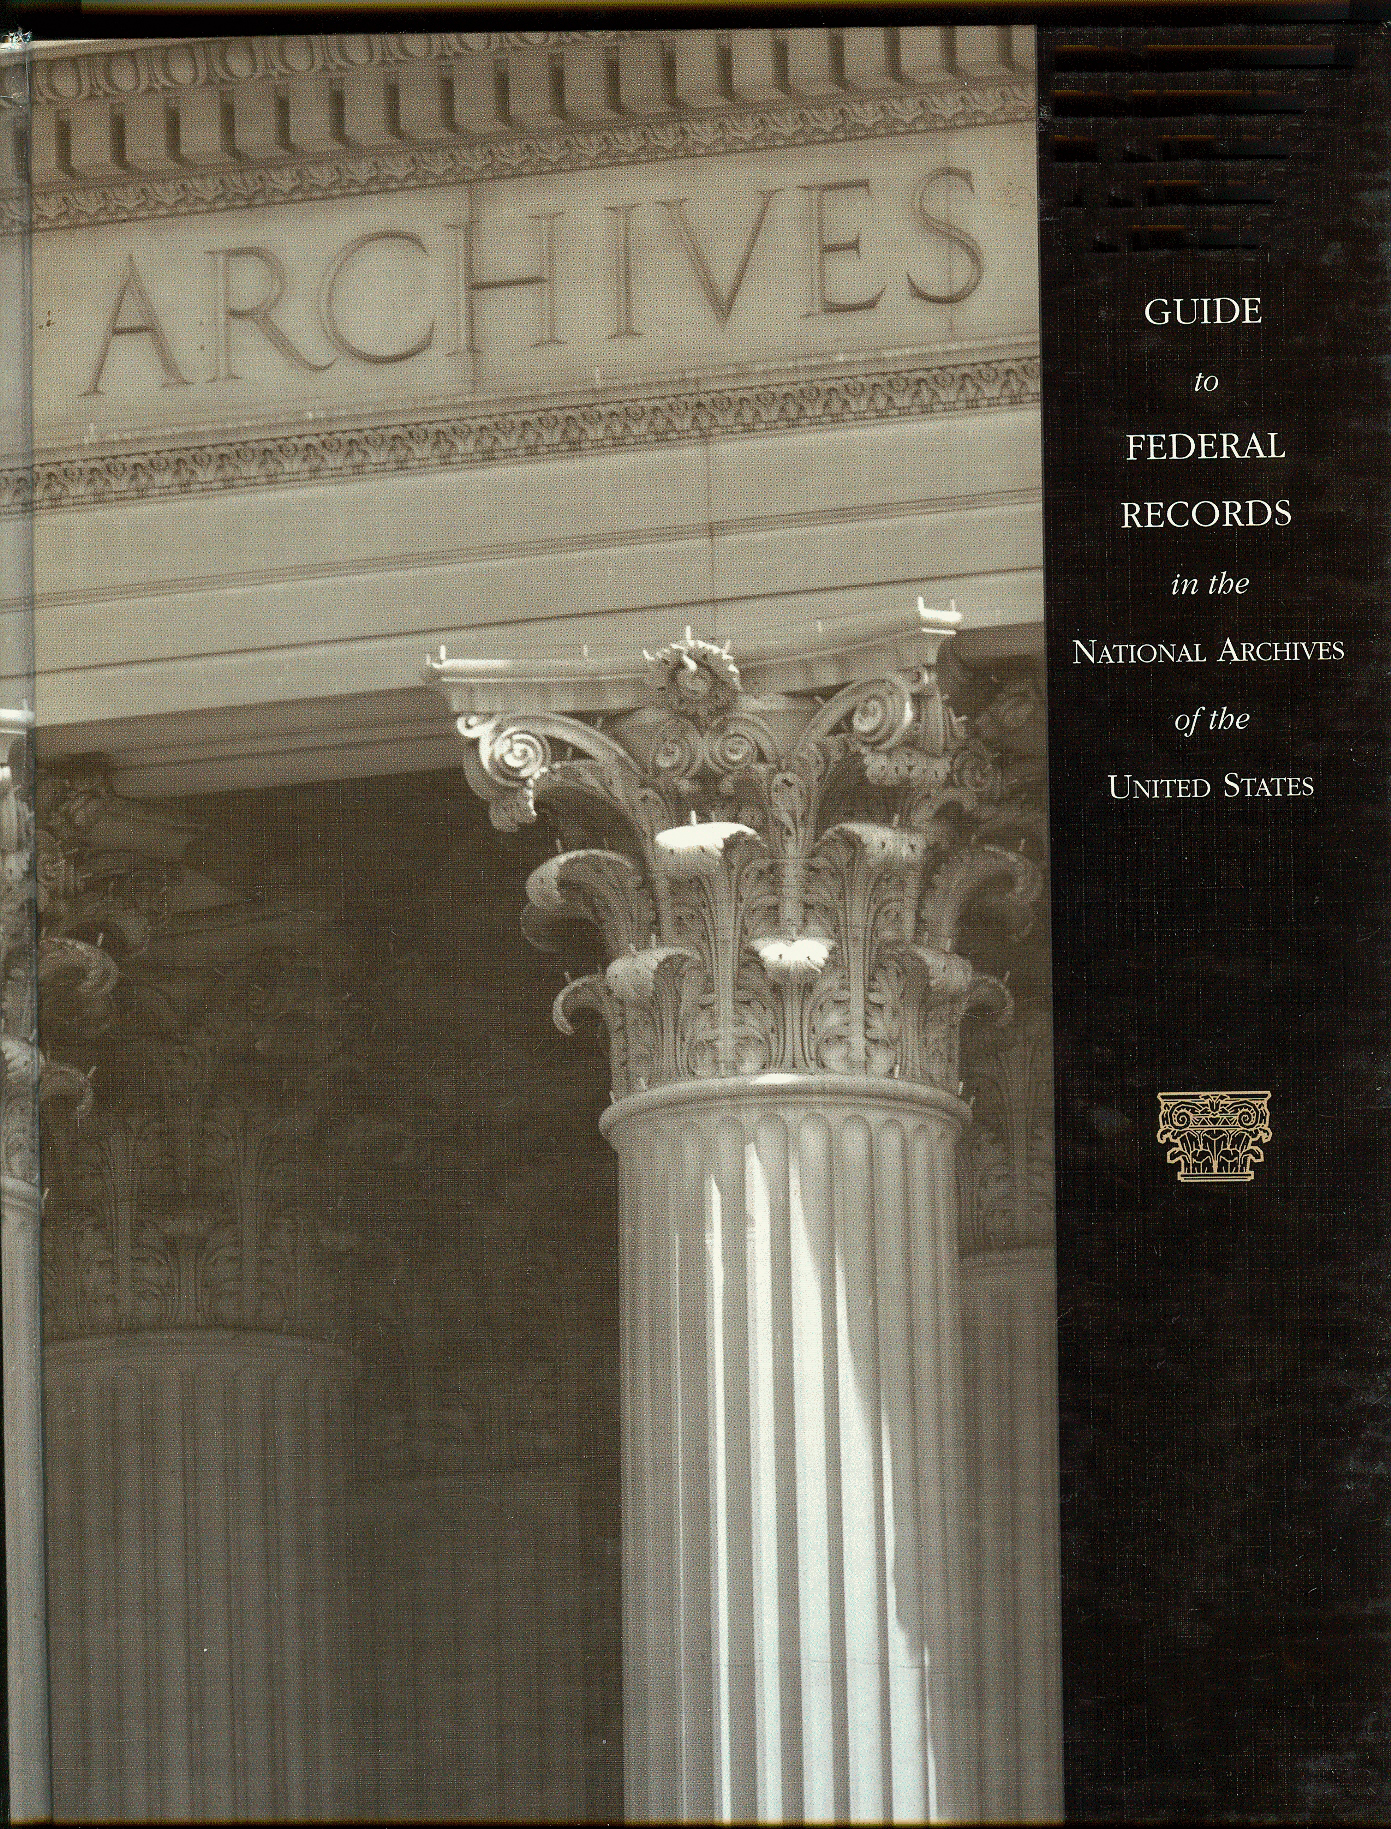 Cover image - Guide to National Archives of the U.S.